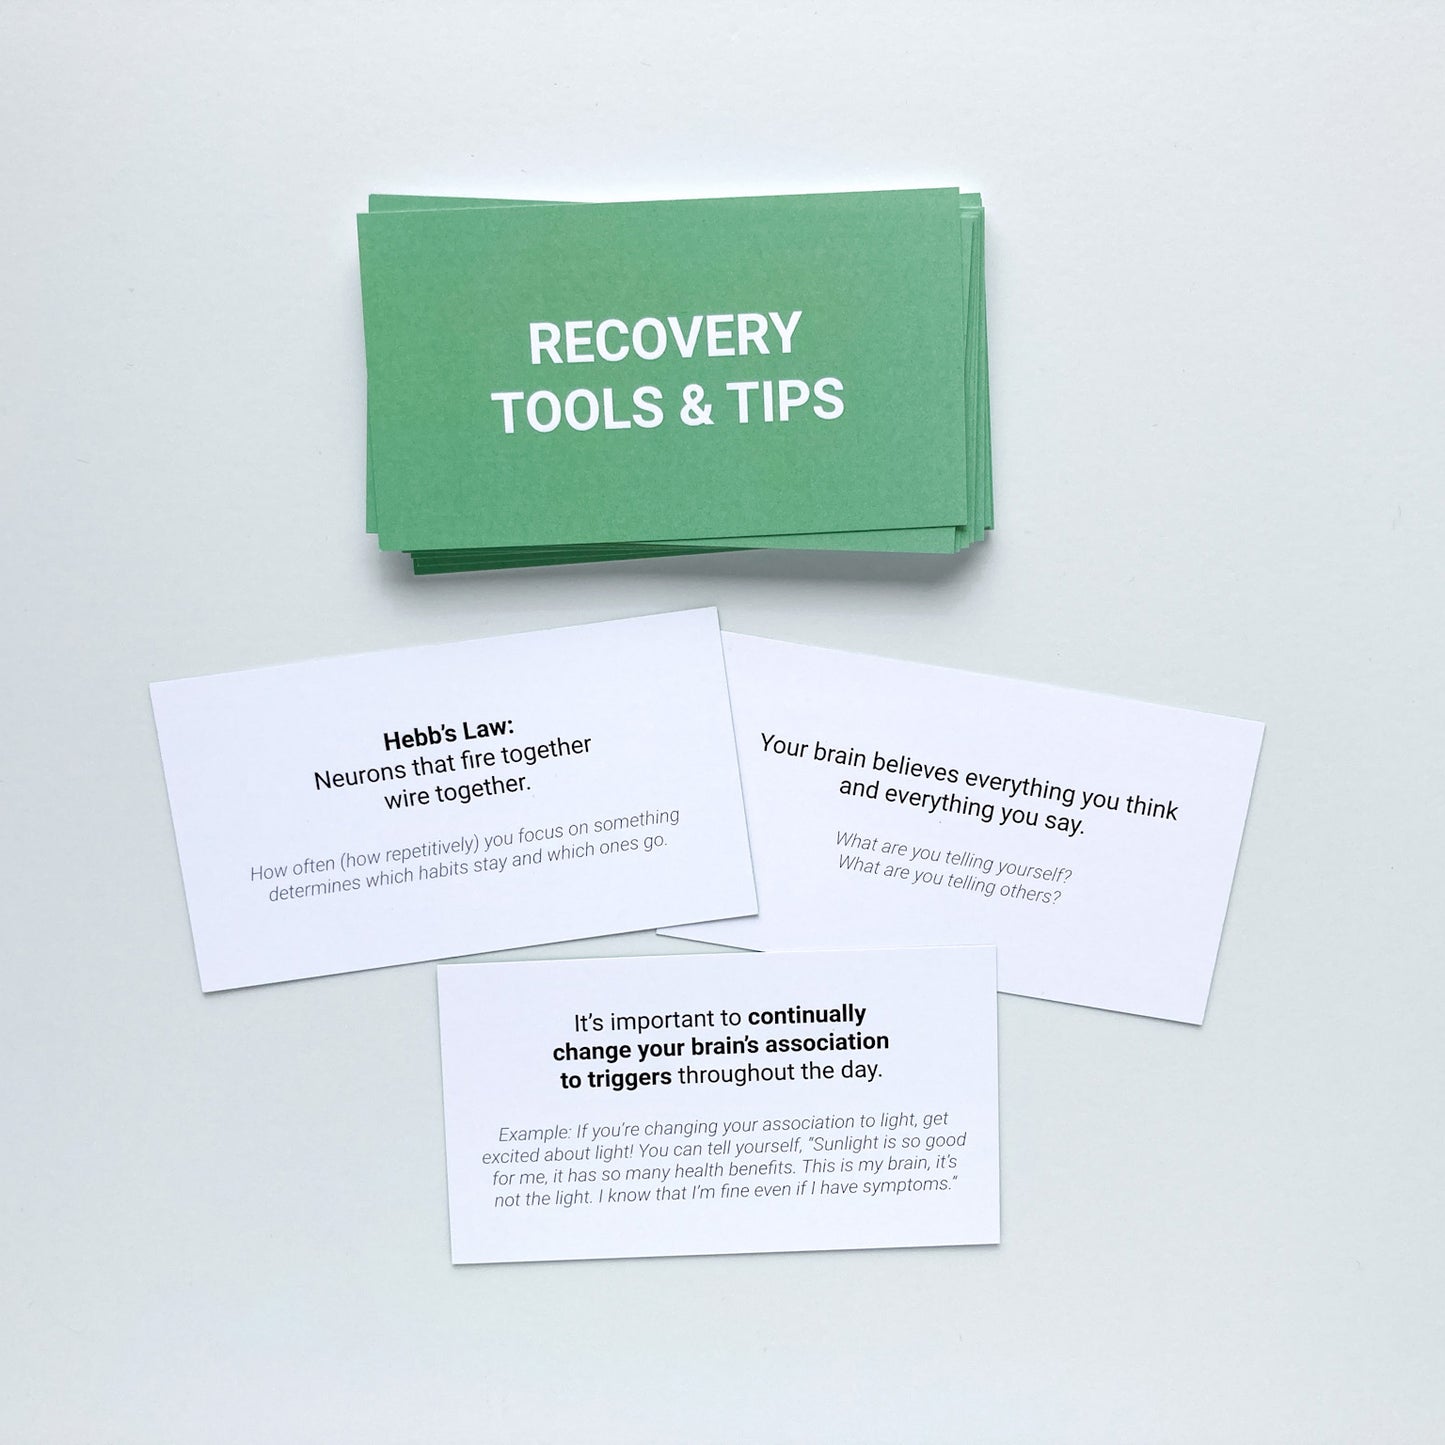 How I'm Healing Brain Retraining Practice Cards. Recovery  Tools & Tips cards pictured